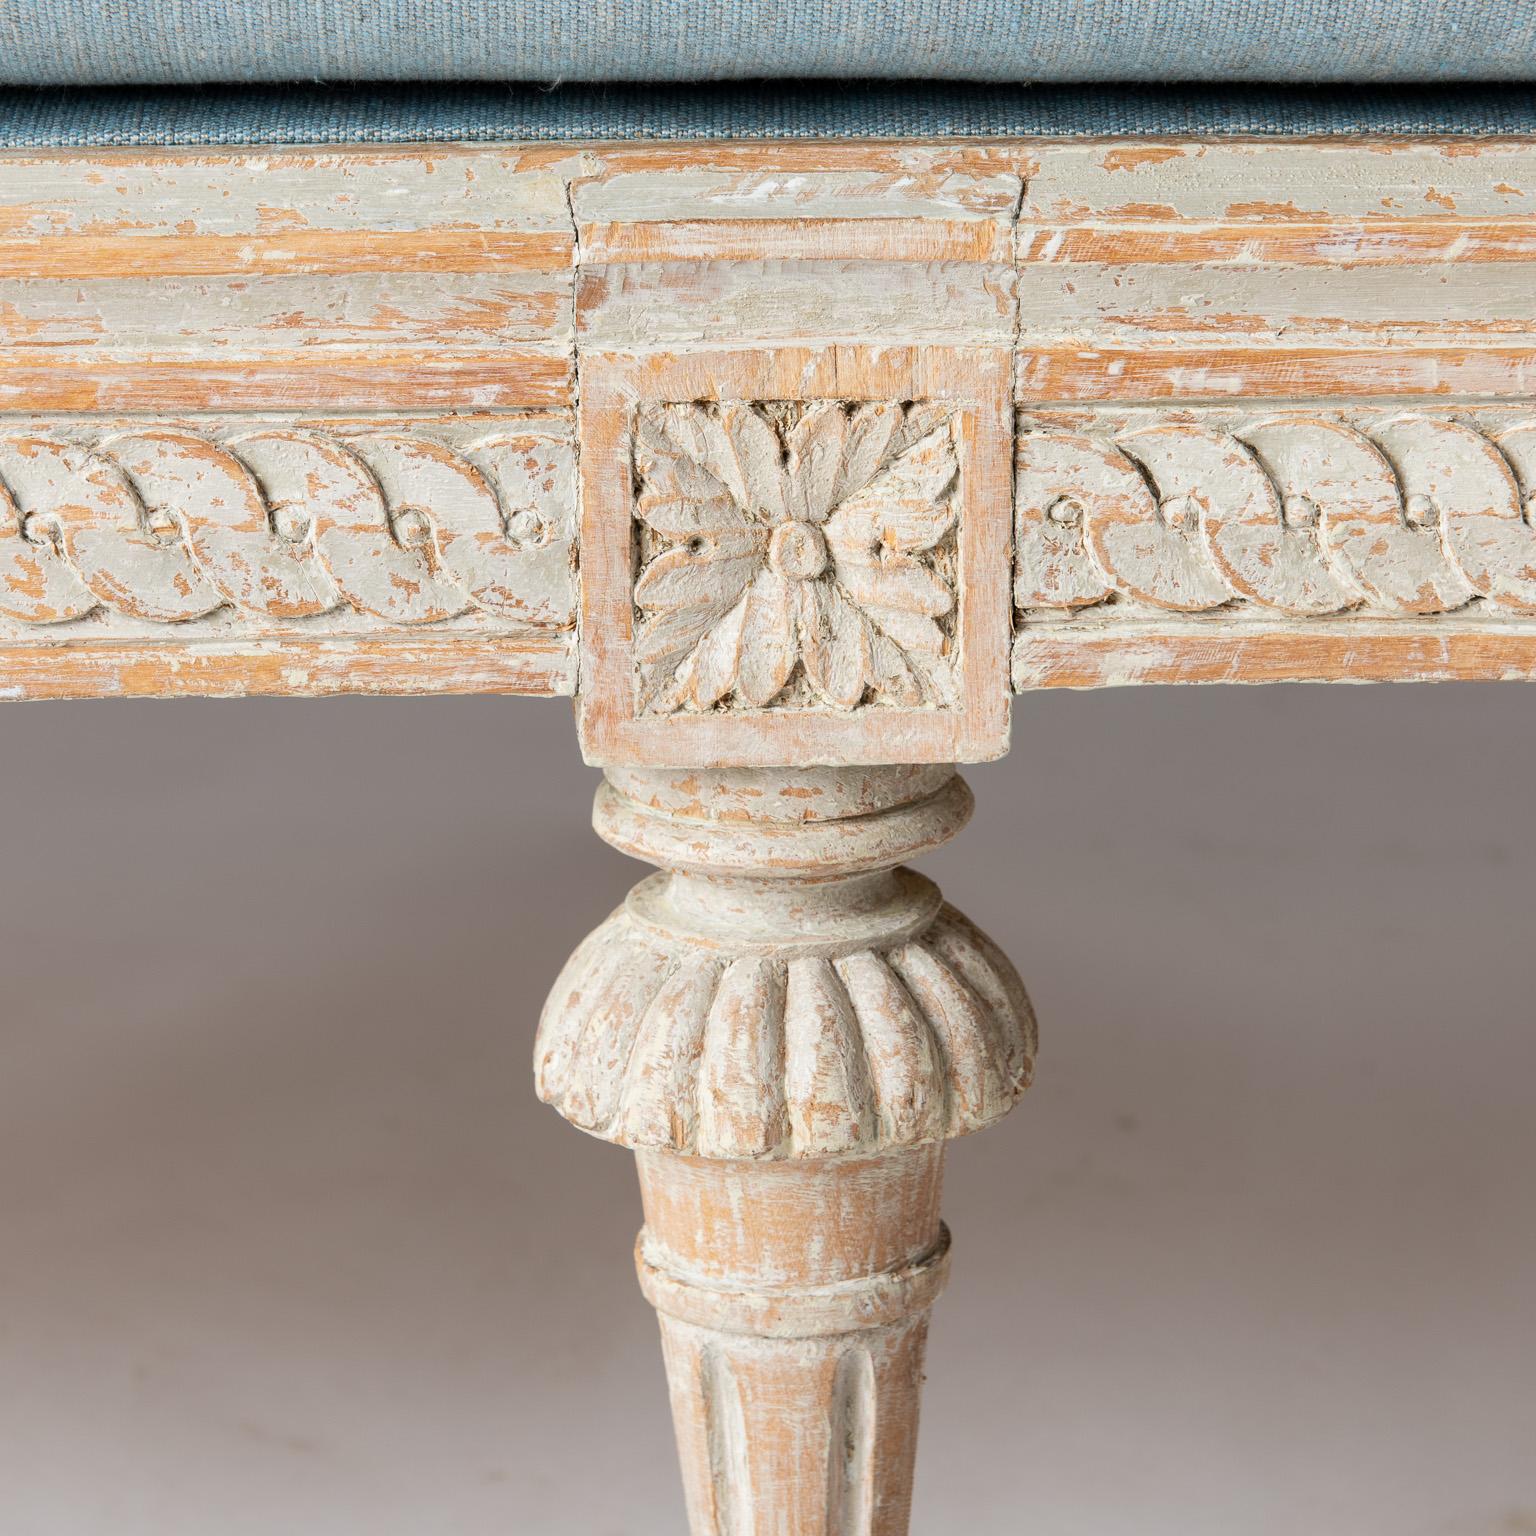 Hand-Carved Swedish, Signed, Gustavian Period “Trågsoffa” from Stockholm, circa 1790